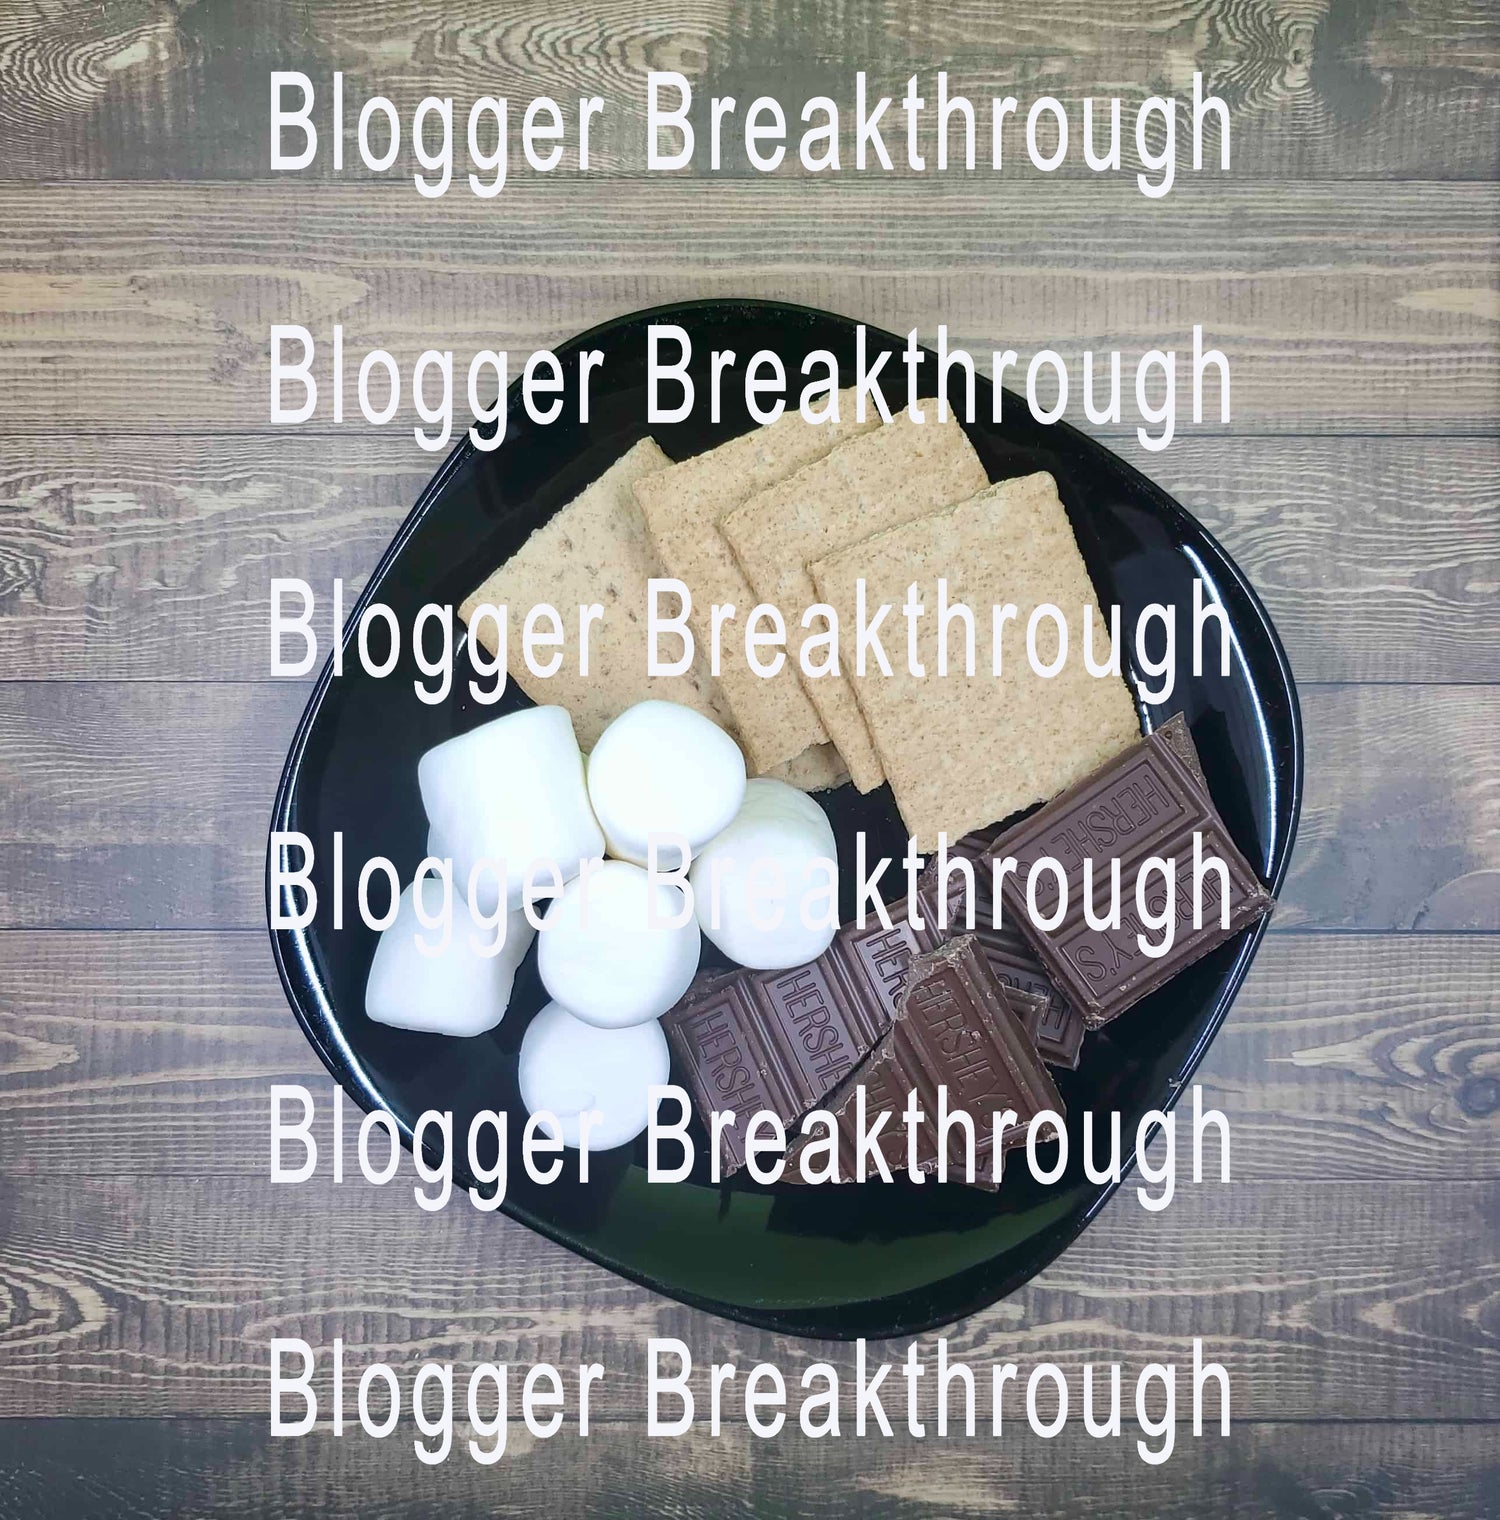 A high-quality Blogger Breakthrough Summit stock photo featuring a summer-themed plate with marshmallows, chocolate bars, and graham crackers, with the text &quot;blogger breakthrough&quot; superimposed multiple times to make your blog.